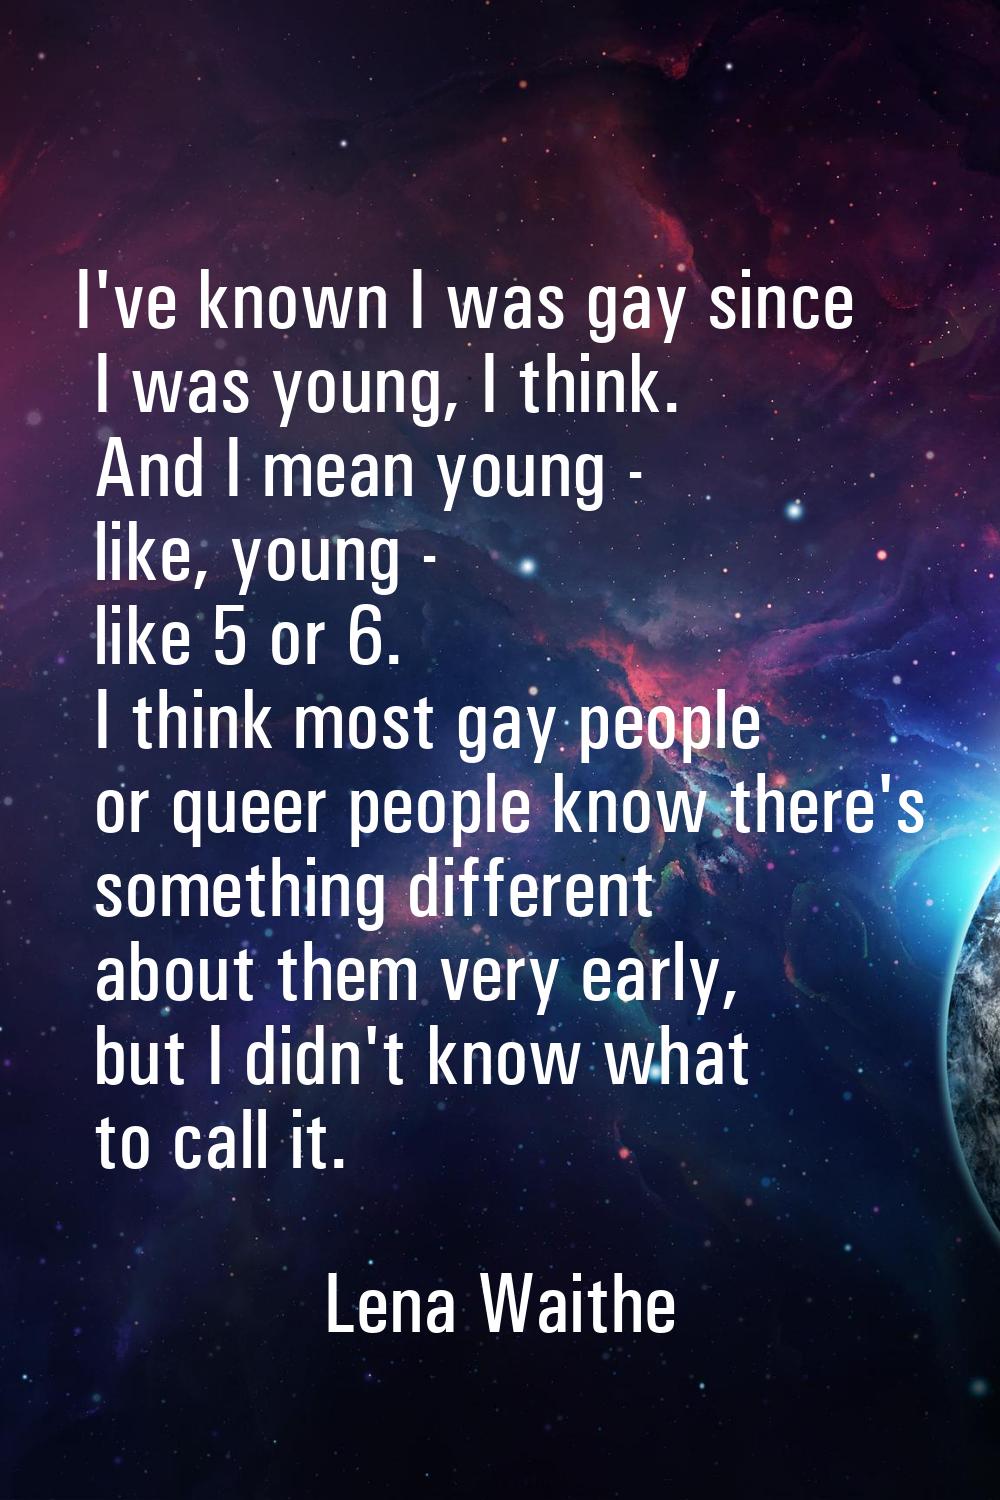 I've known I was gay since I was young, I think. And I mean young - like, young - like 5 or 6. I th